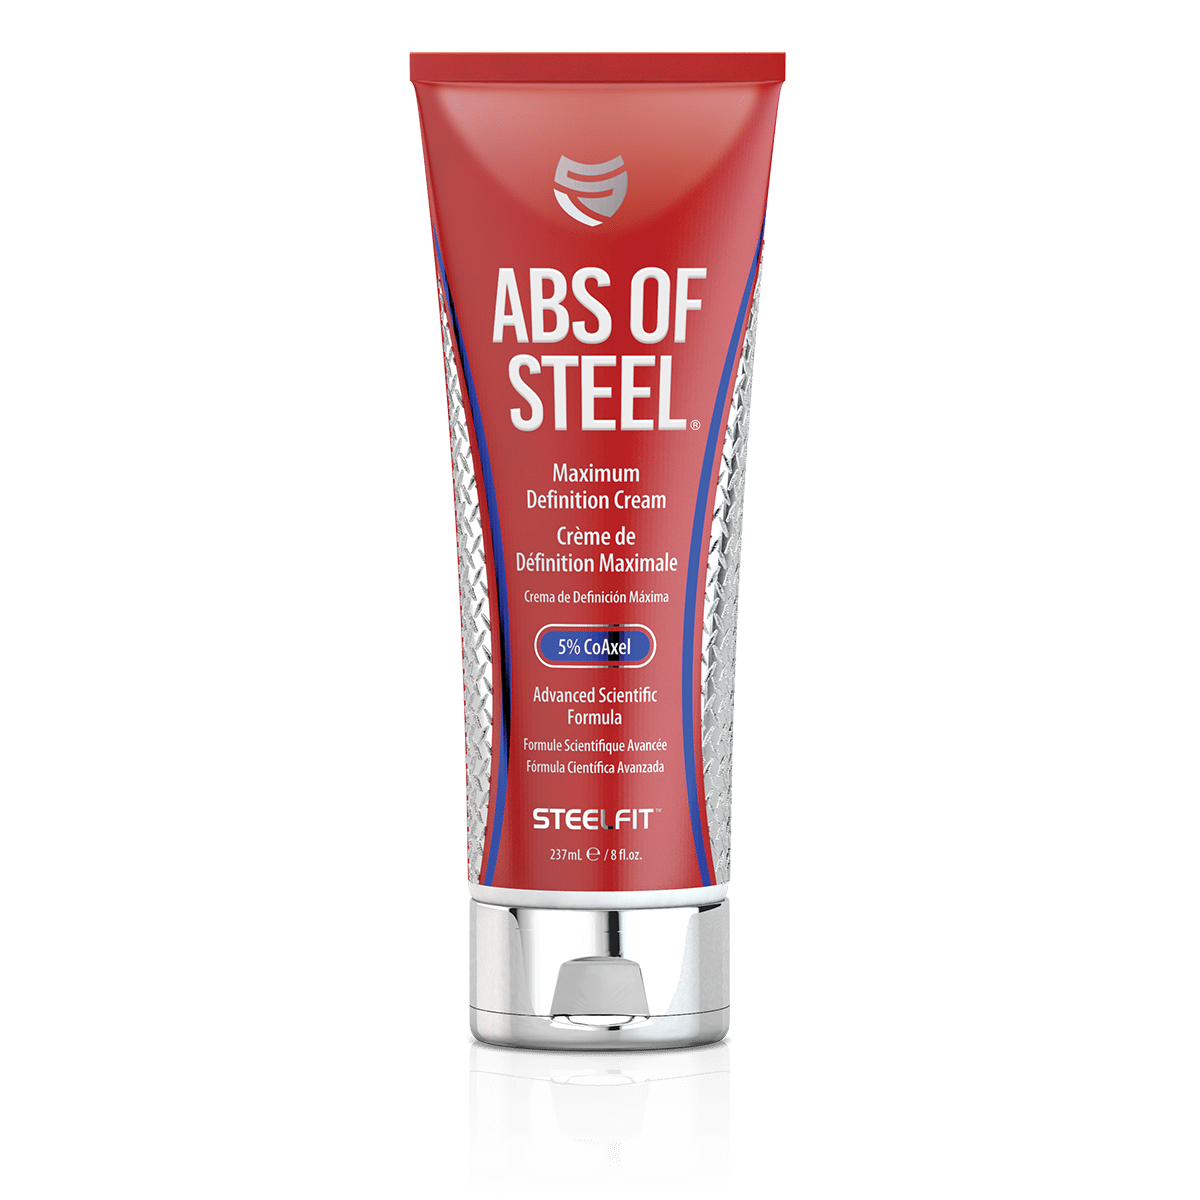 ABS OF STEEL®